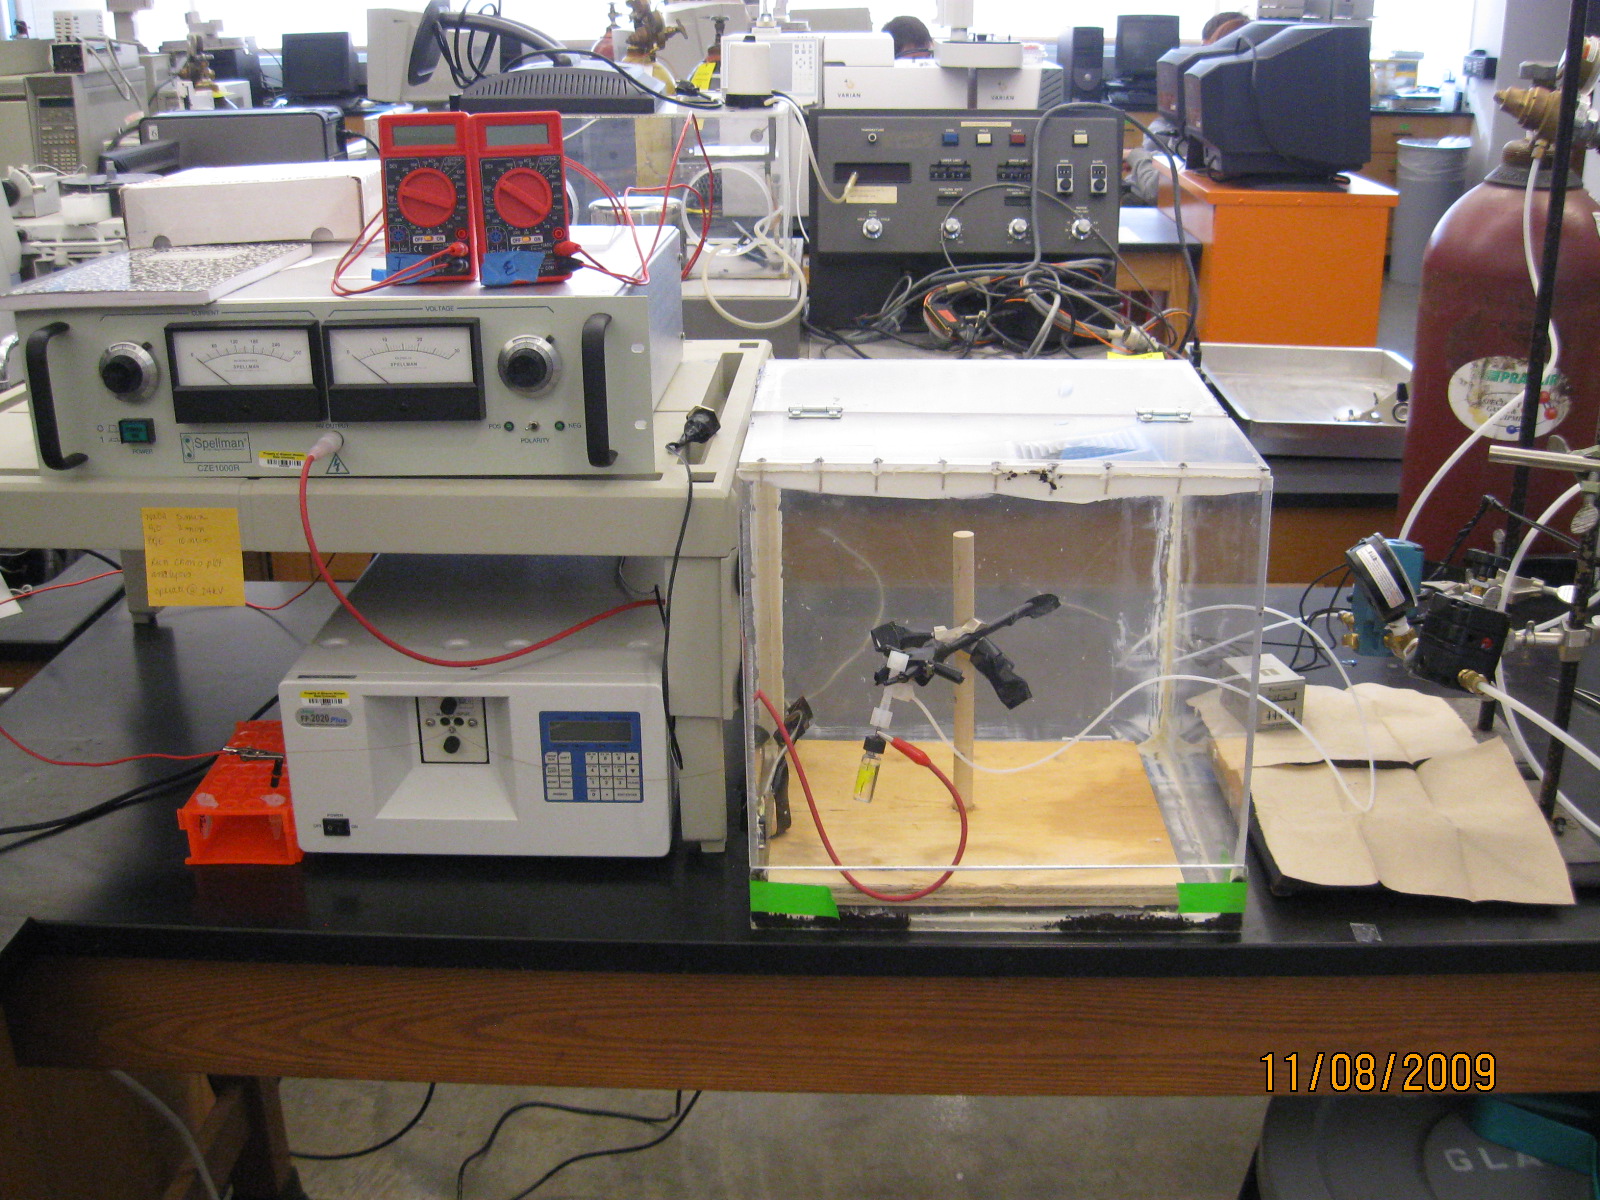 Home Built Capillary Electrophoresis System with Fluorescence Detection